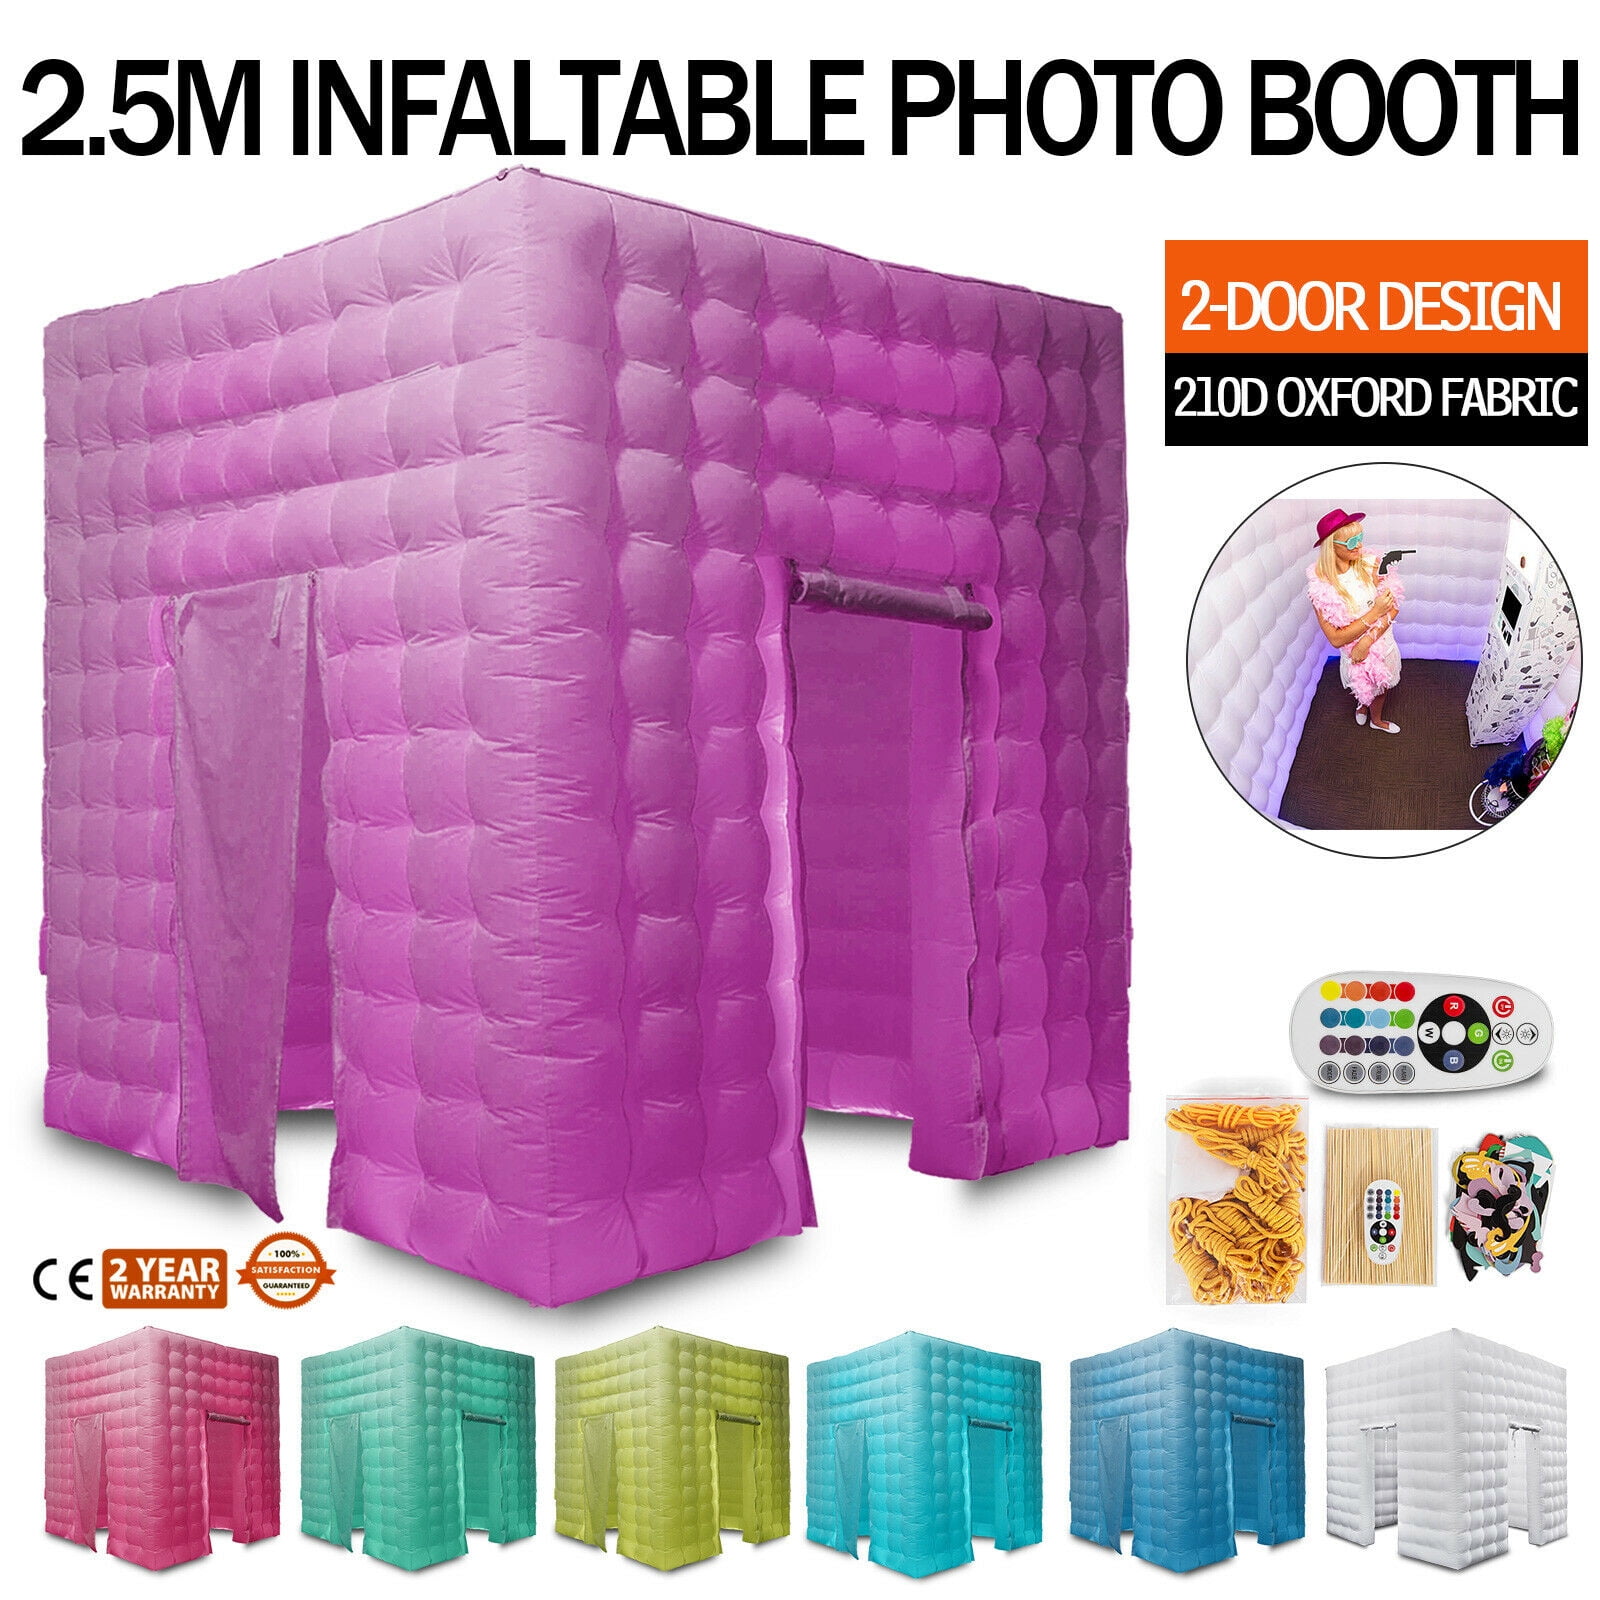 2 Door Inflatable LED Air Pump Photo Booth Tent 7 Colors Fun Party 2.5M 